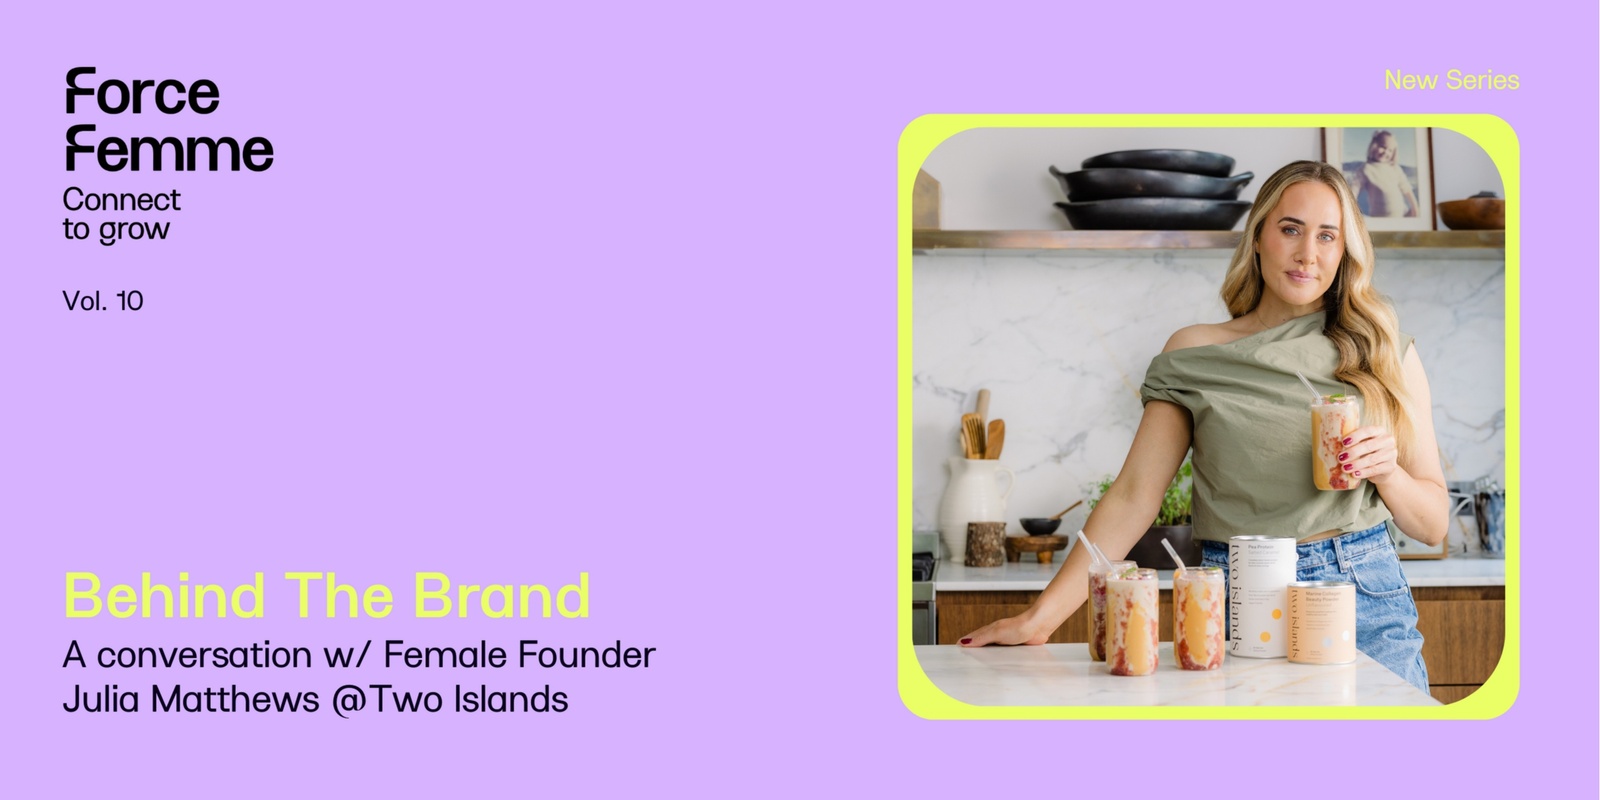 Banner image for Force Femme Vol. 10 - Behind The Brand w/ Female Founder Julia Matthews @Two Islands